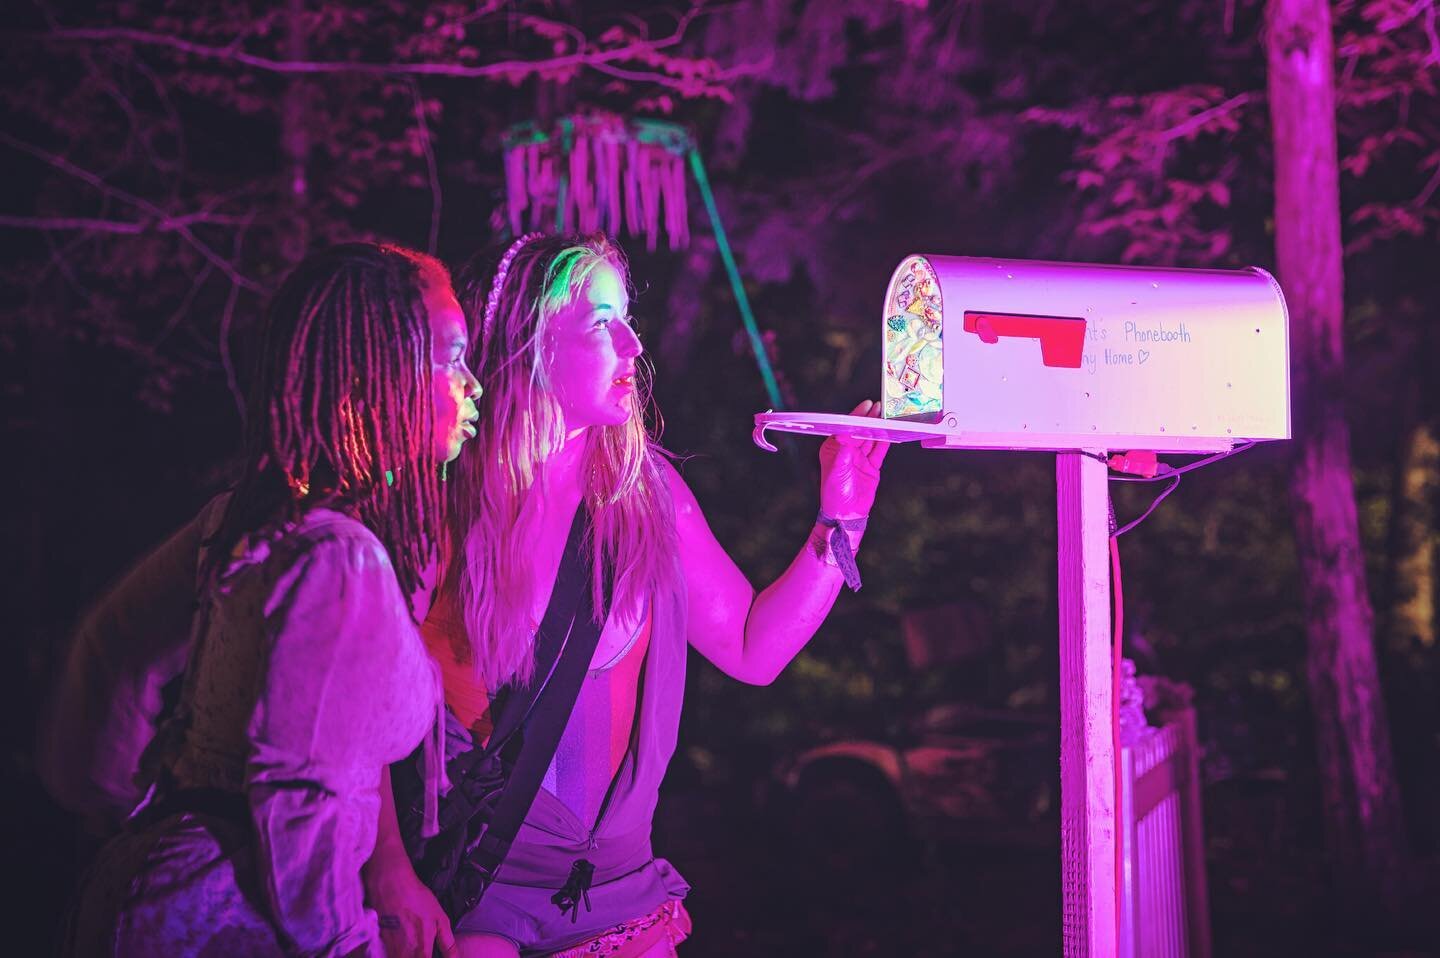 Big, big #thankyou extended to all the experiential artists who dream big and share it for the vibes!
💜Elements curated installation artists, painters, and interactive performers brought so much joy and wonderment to the festival experience. One of 